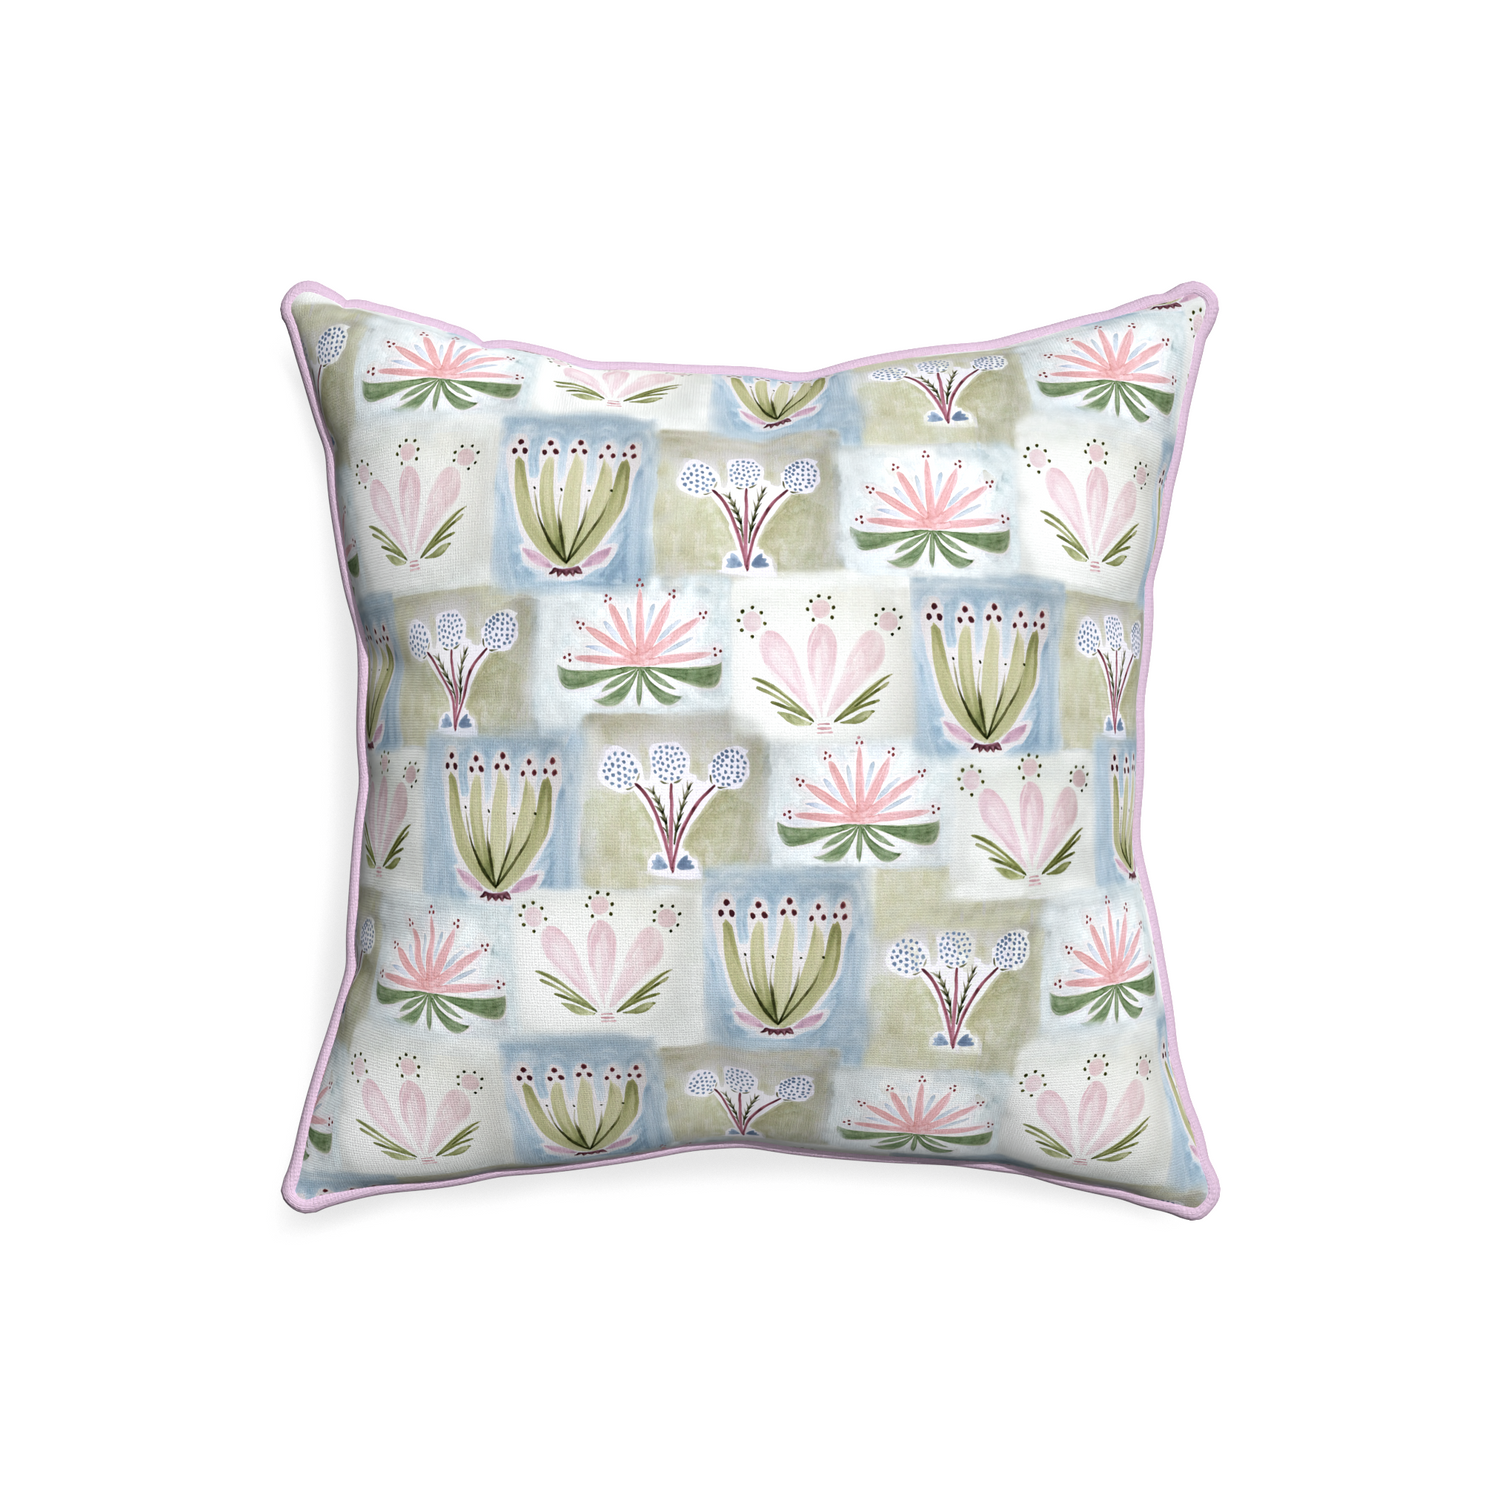 20-square harper custom hand-painted floralpillow with l piping on white background